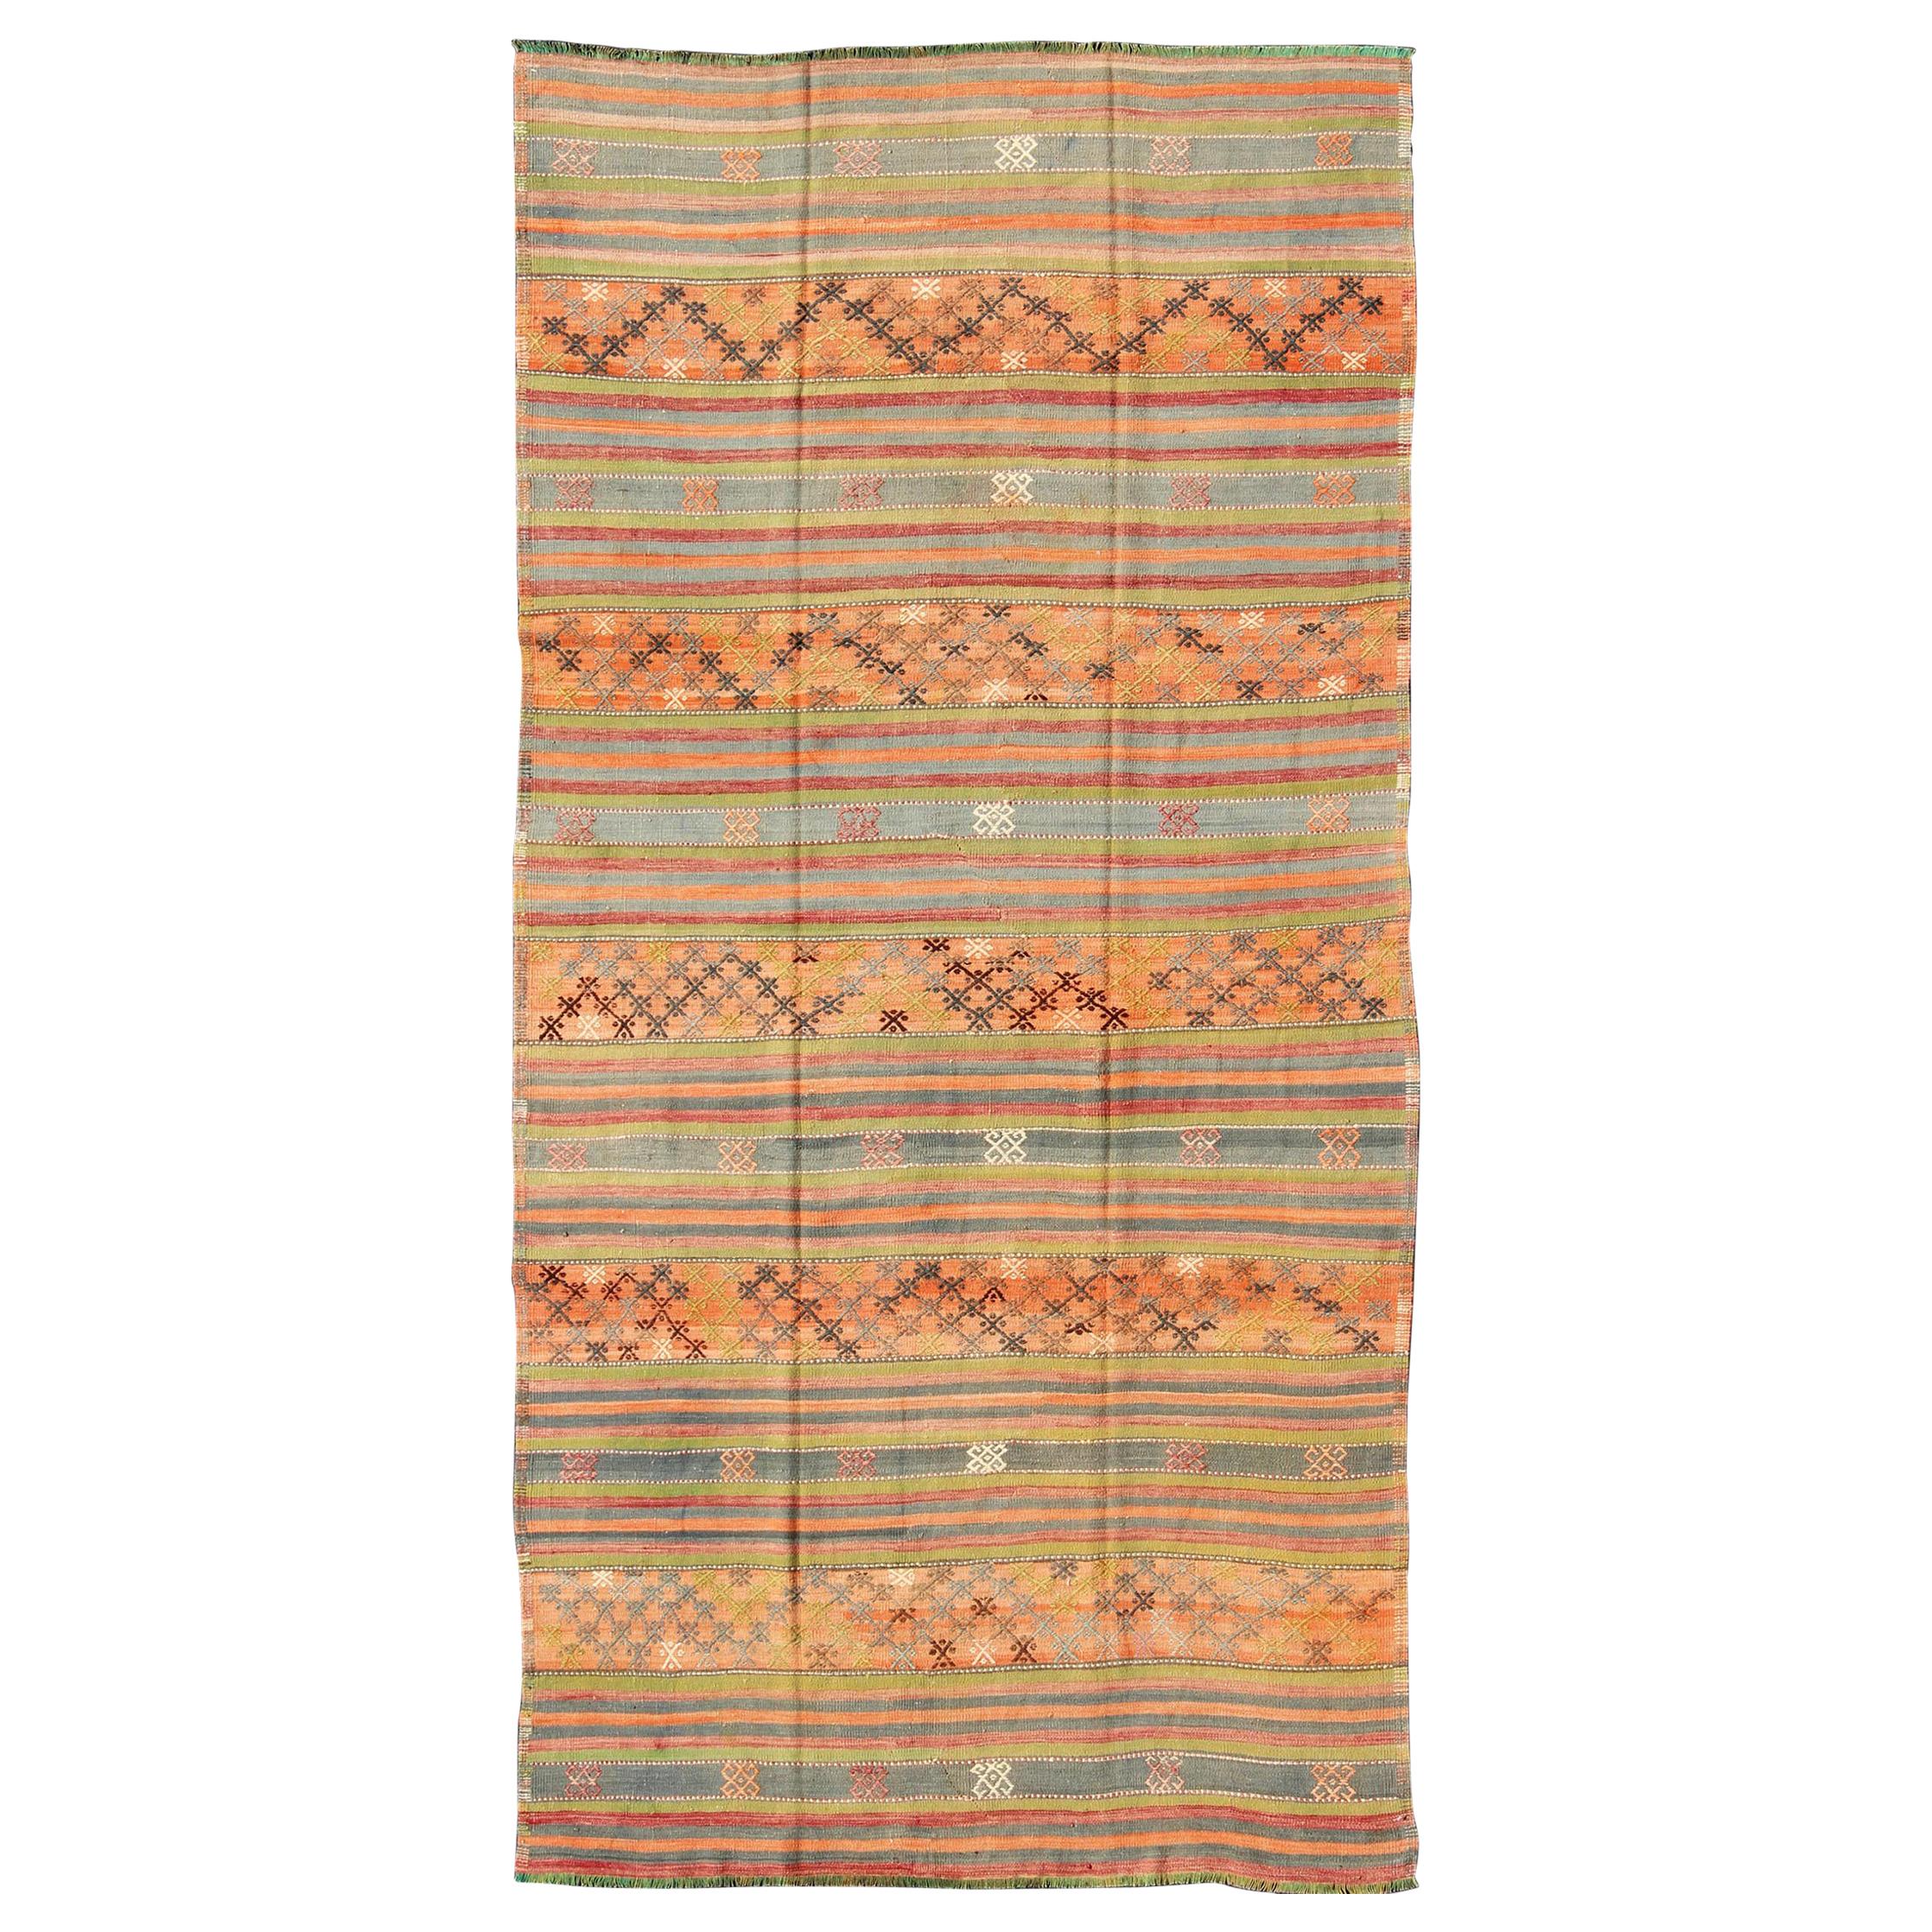 Colorful Vintage Embroidered Kilim with Stripe's and Geometric Prints